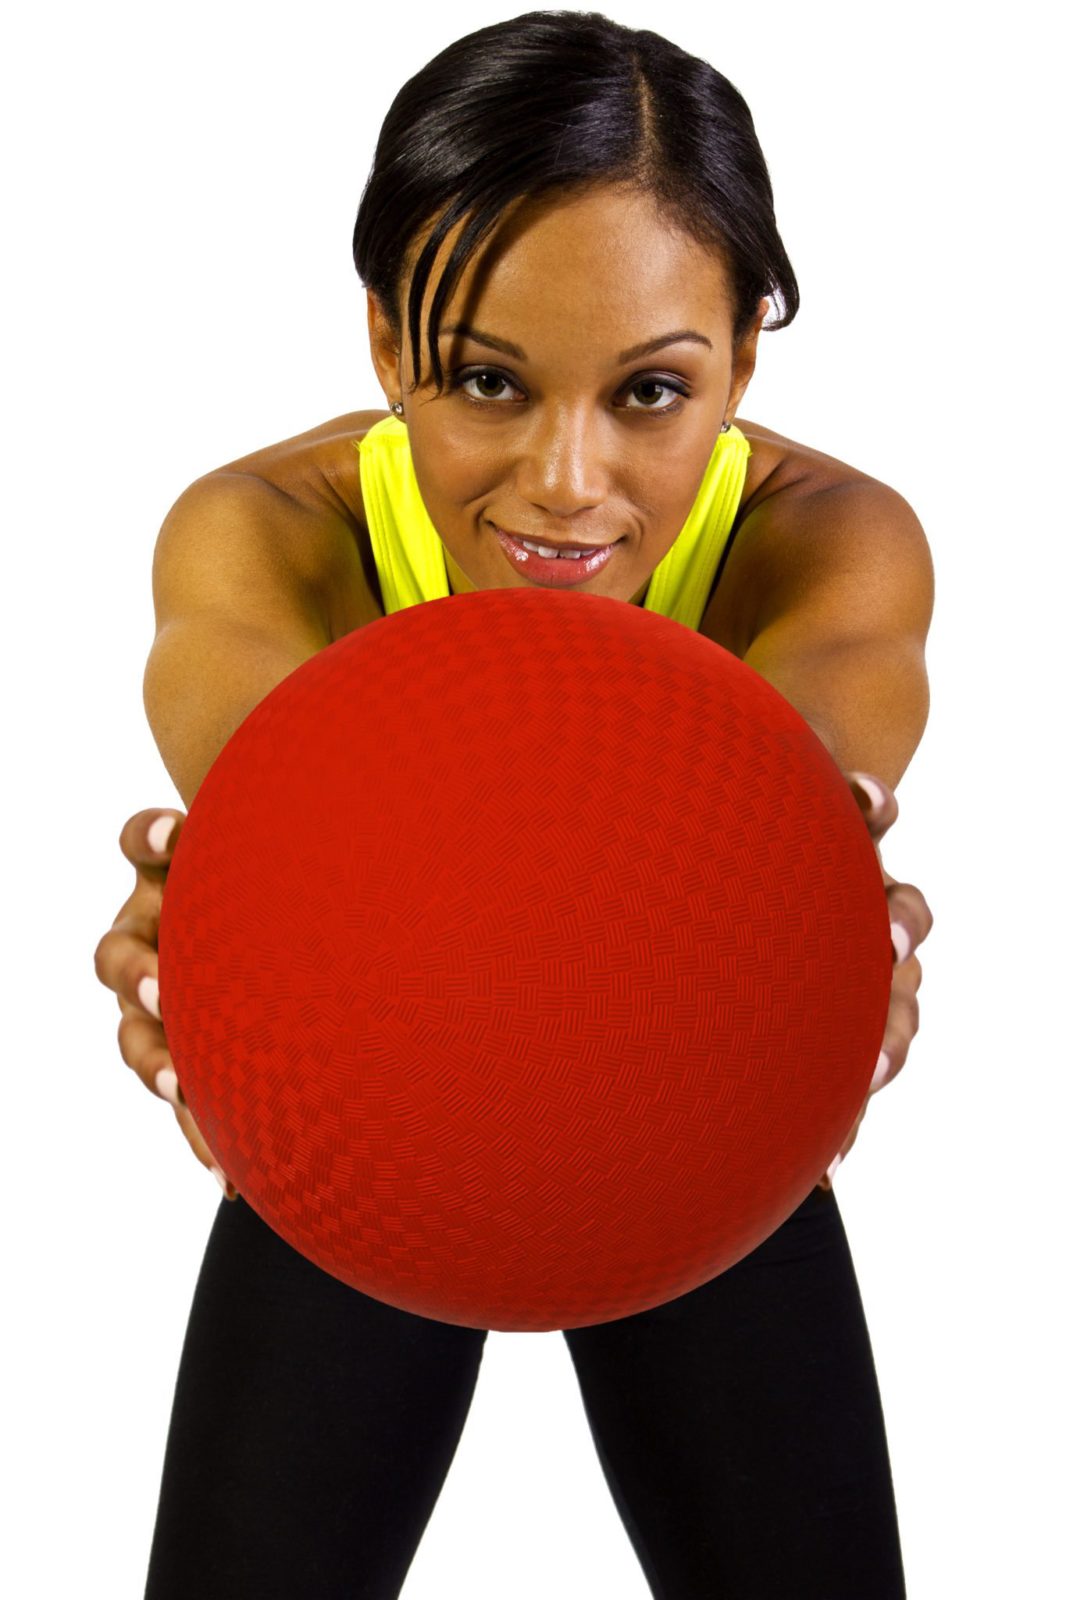 Remember this from gym class? Brush up on how to play dodgeball and the dodgeball rules at www.GameOnFamily.com! Game on.